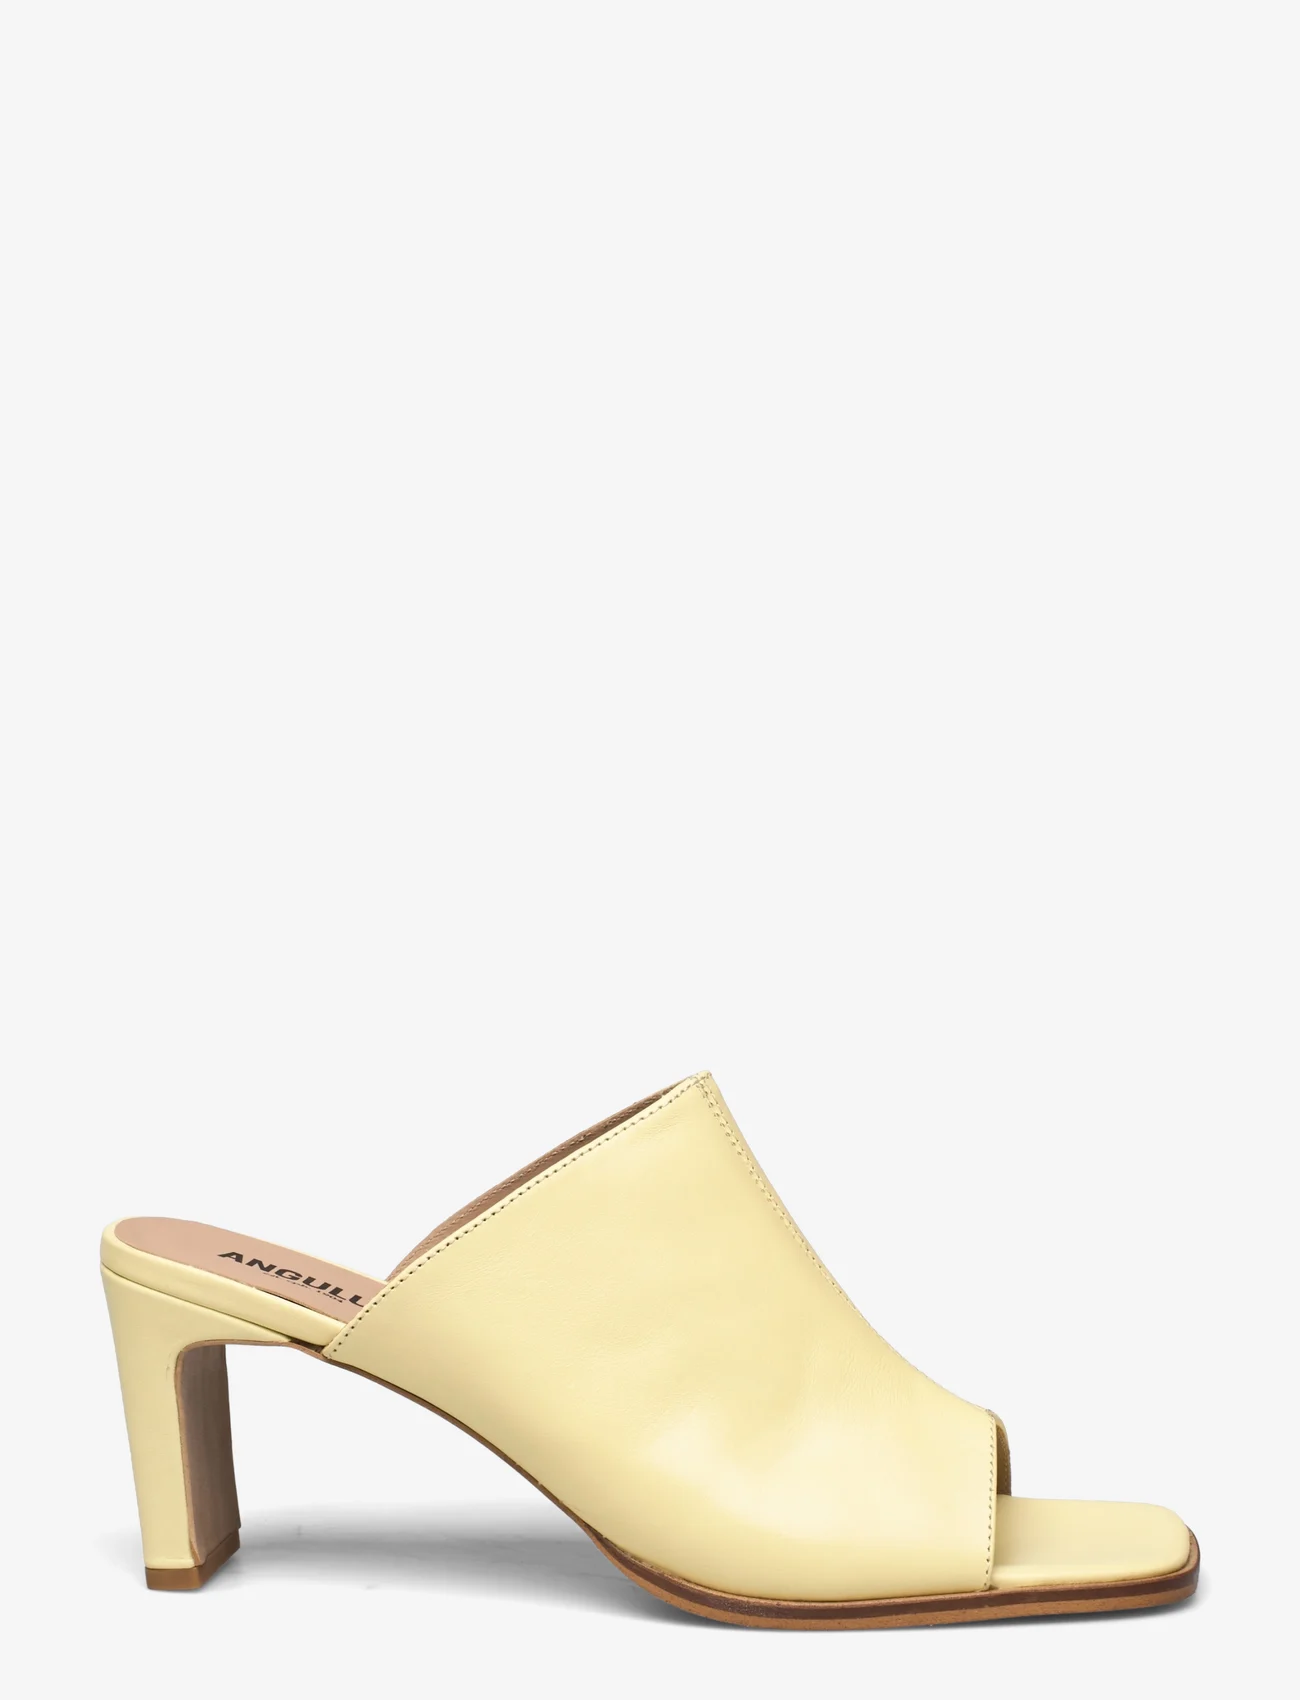 ANGULUS - Sandals - Block heels - mules med hæle - 1495 light yellow - 1